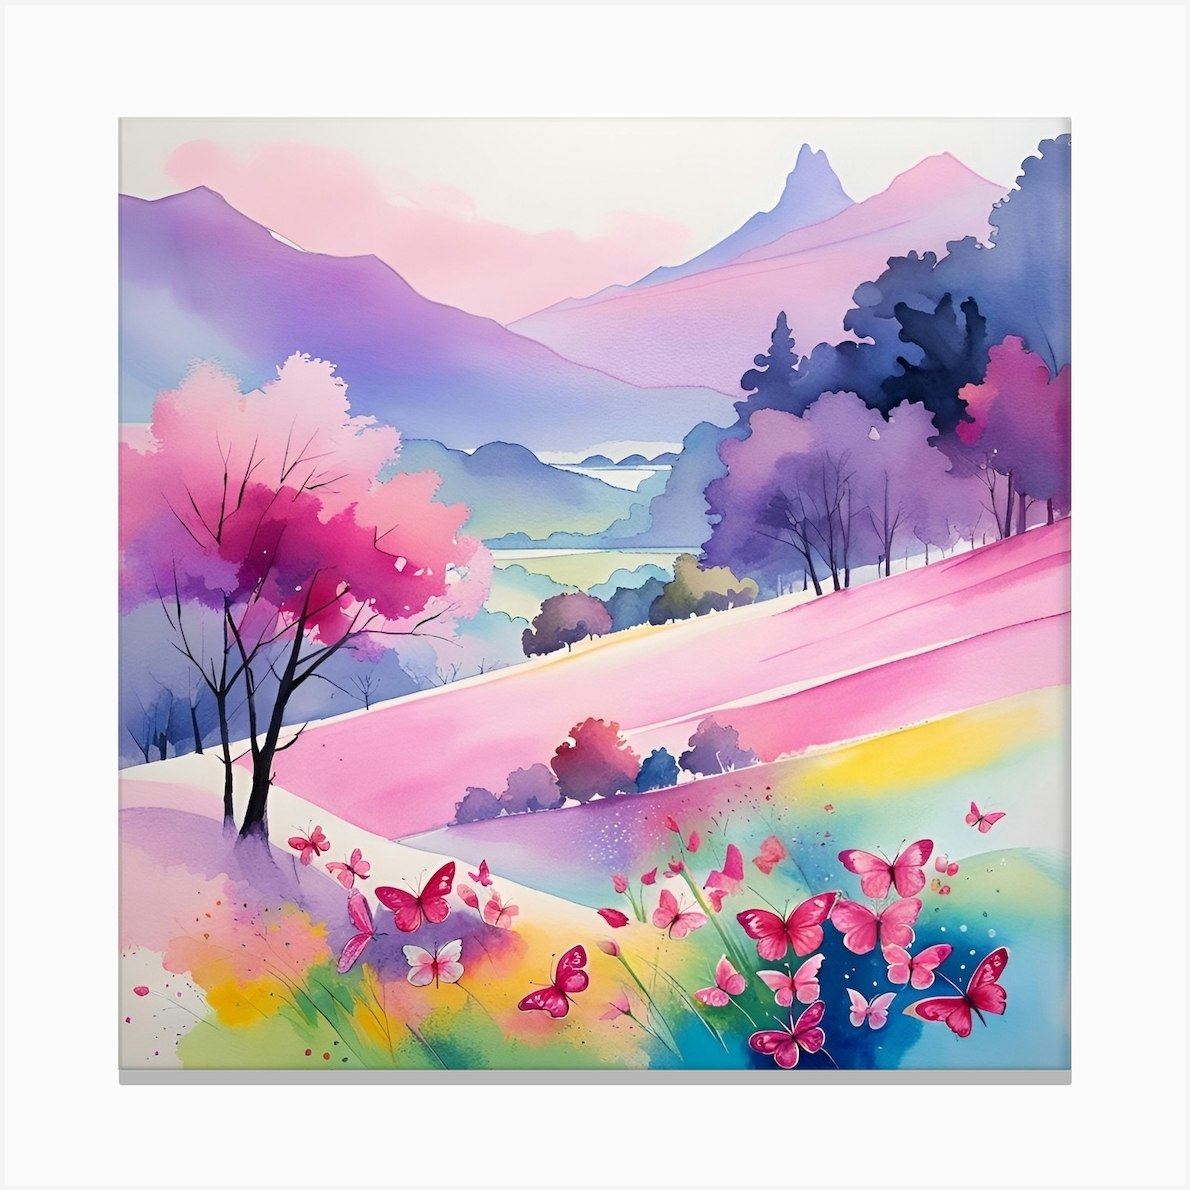 Landscape Watercolor Painting Ideas: Capturing Nature’s Beauty插图3